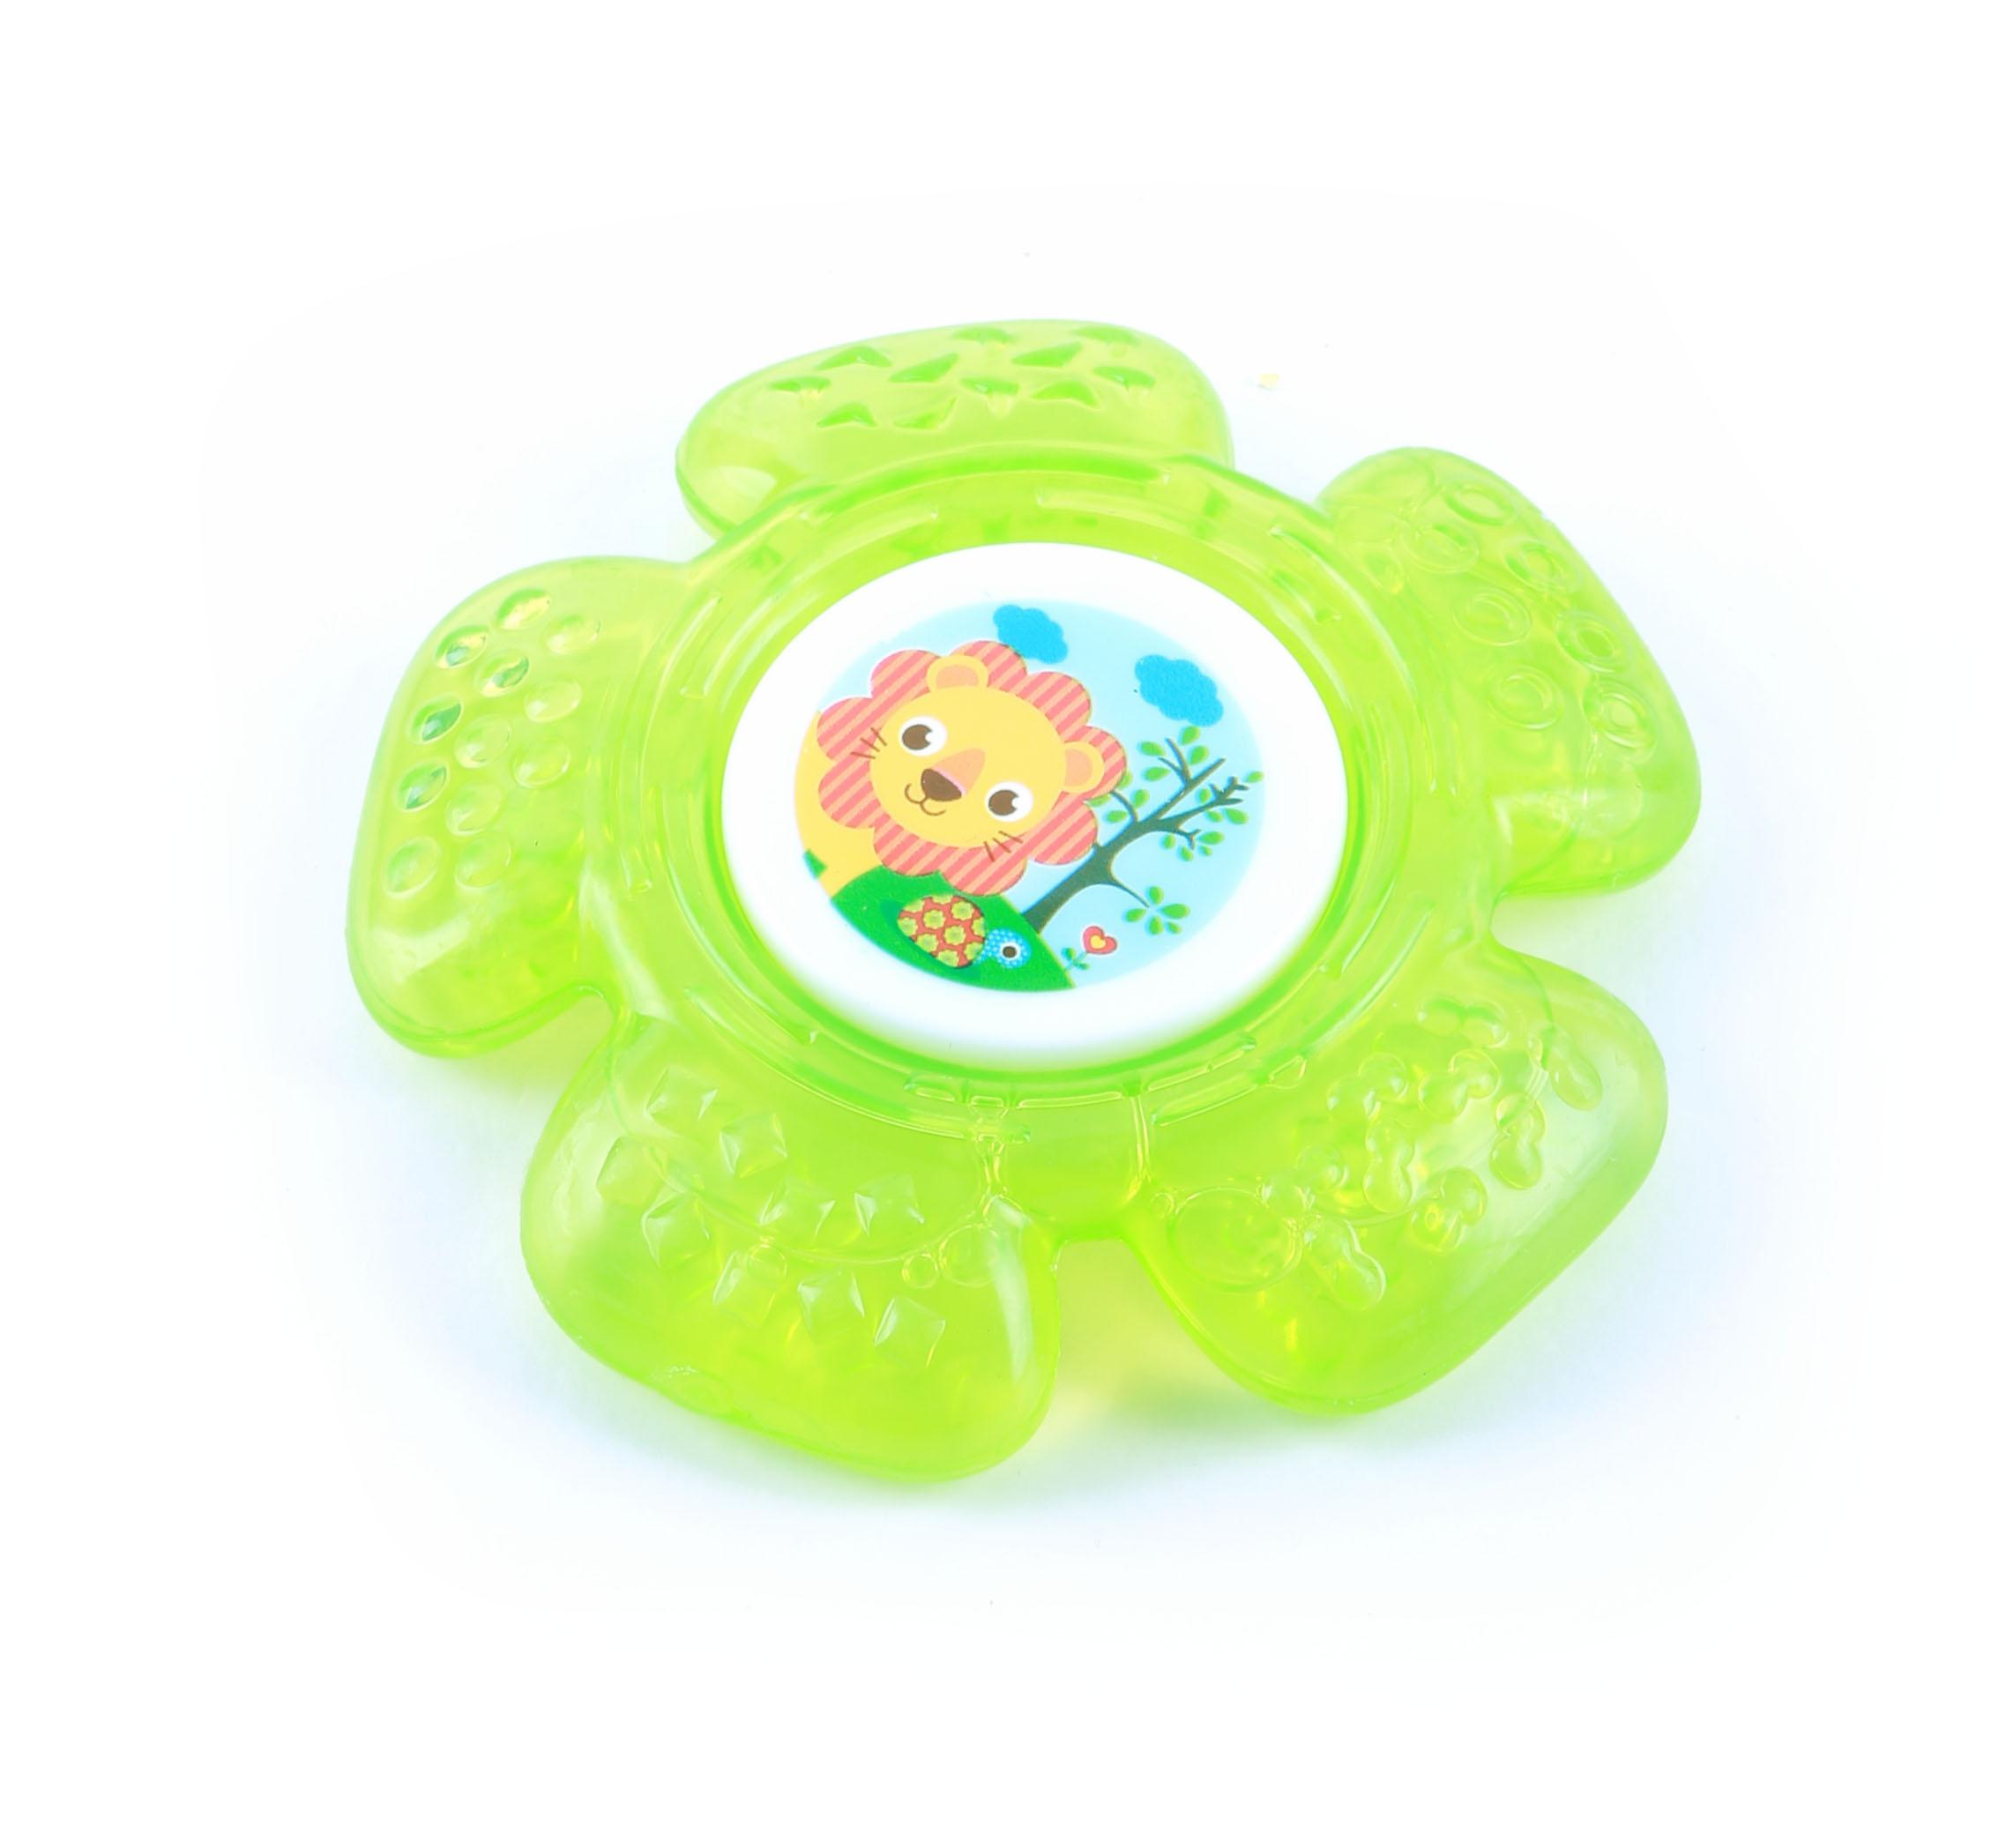 Baby Plus Ring Shaped Water Filled Teether - Soothes Gums & Promotes Healthy Oral Development